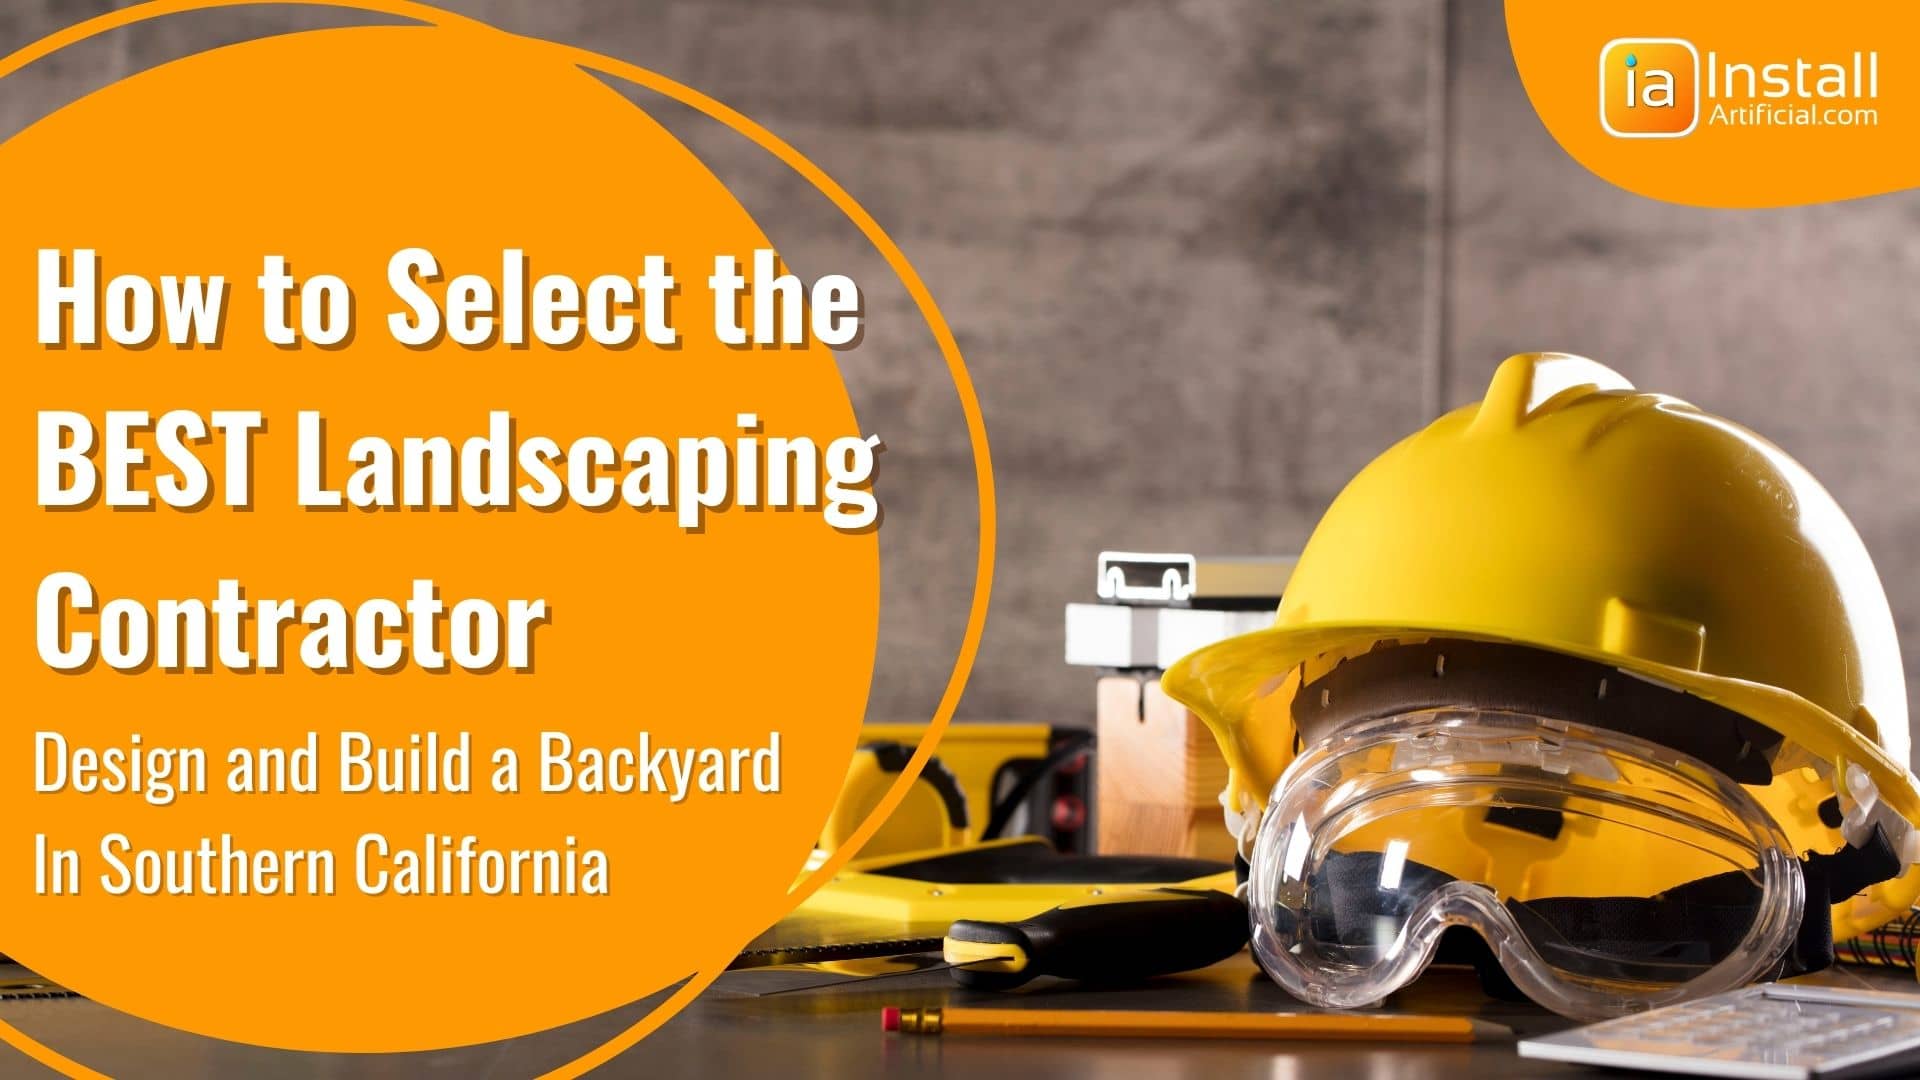 How to Select the Best Landscaping Contractor to Design and Build a Backyard in Southern California